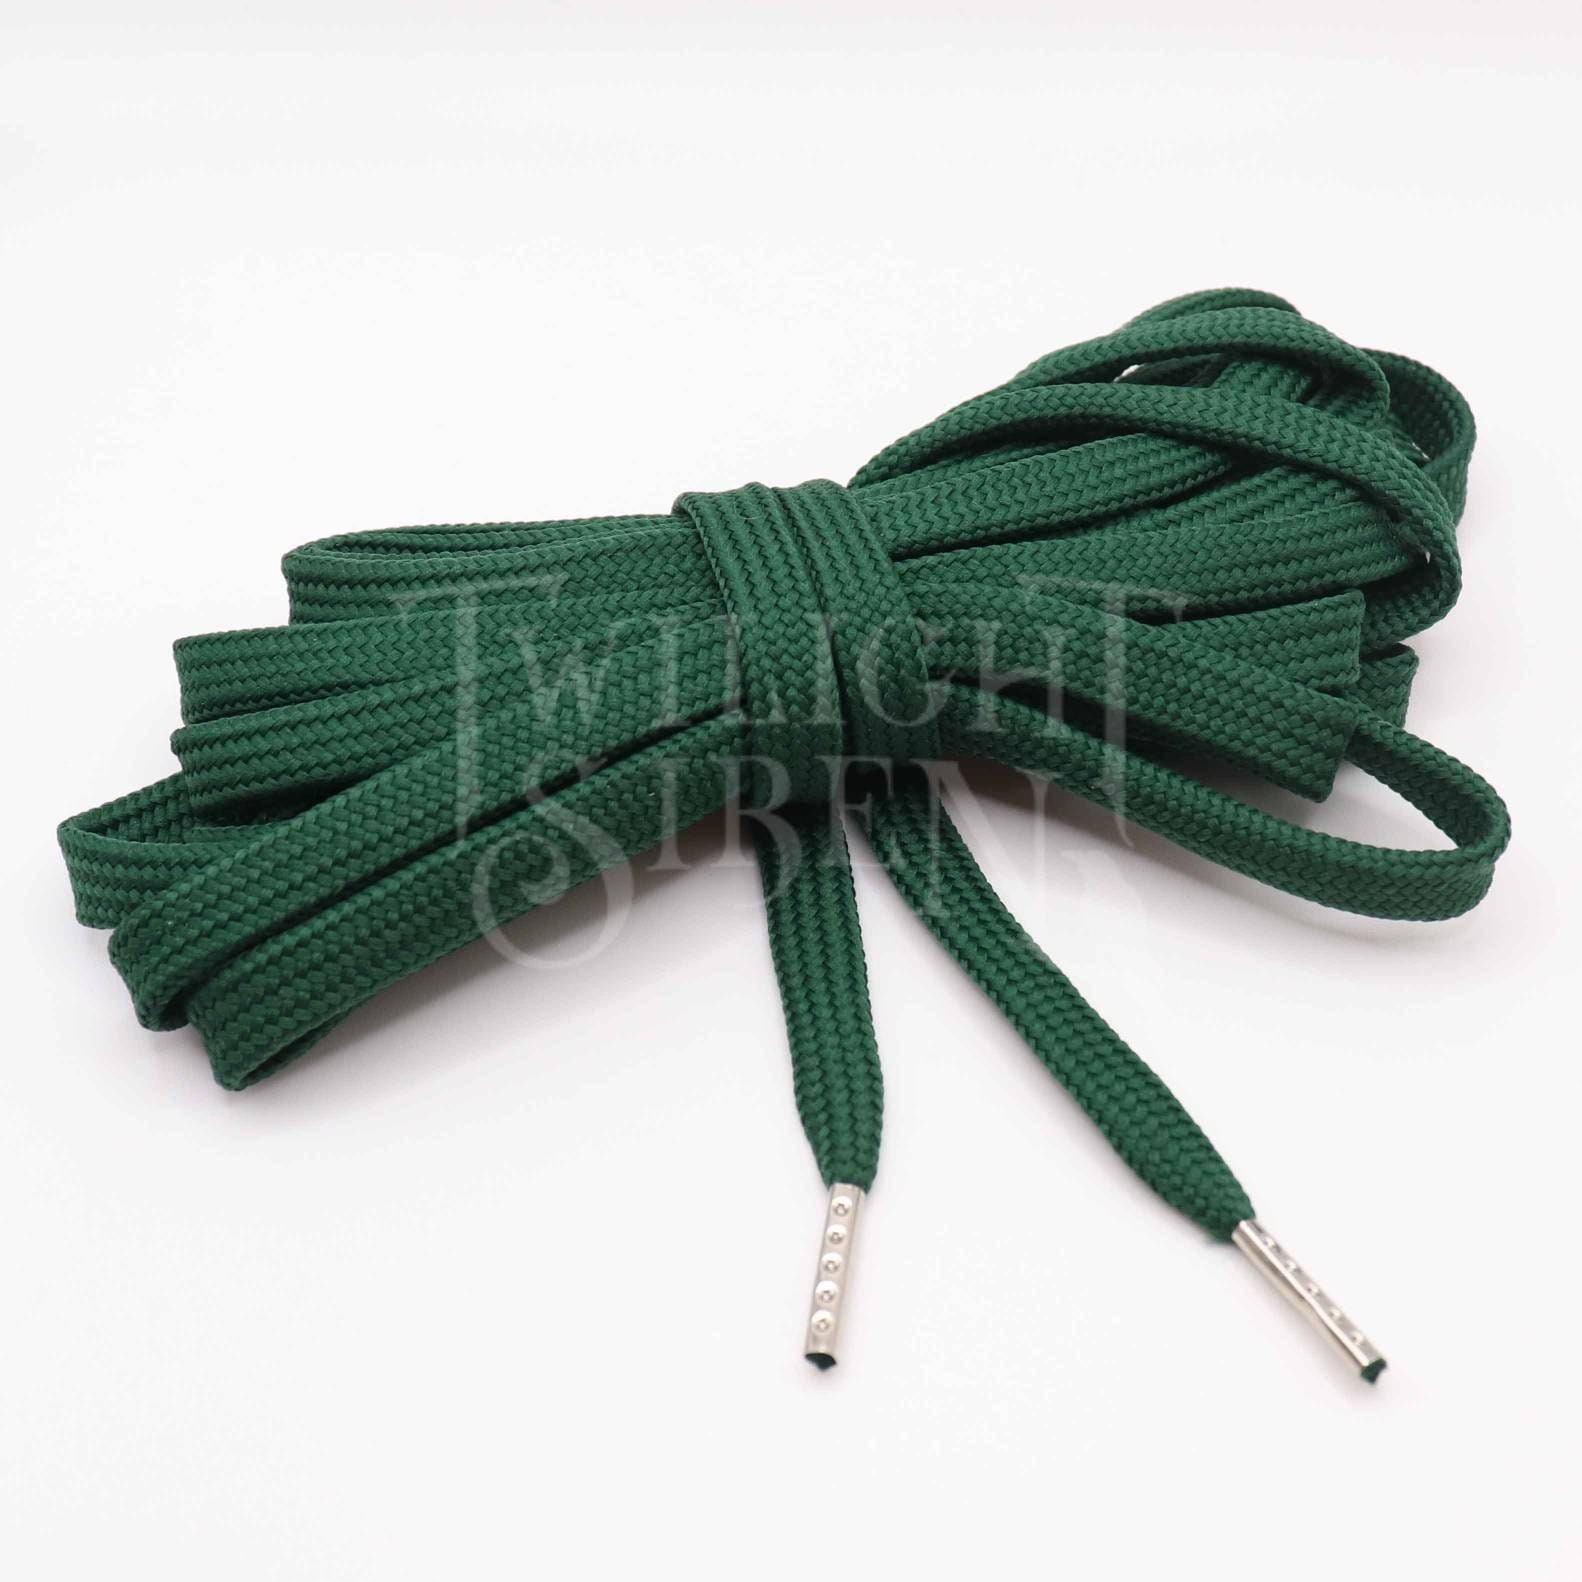 ABAglets - Metal Aglets - Shoelace Tips - Metal Cord Ends - Choice of 4 Colors (Packs of 4)